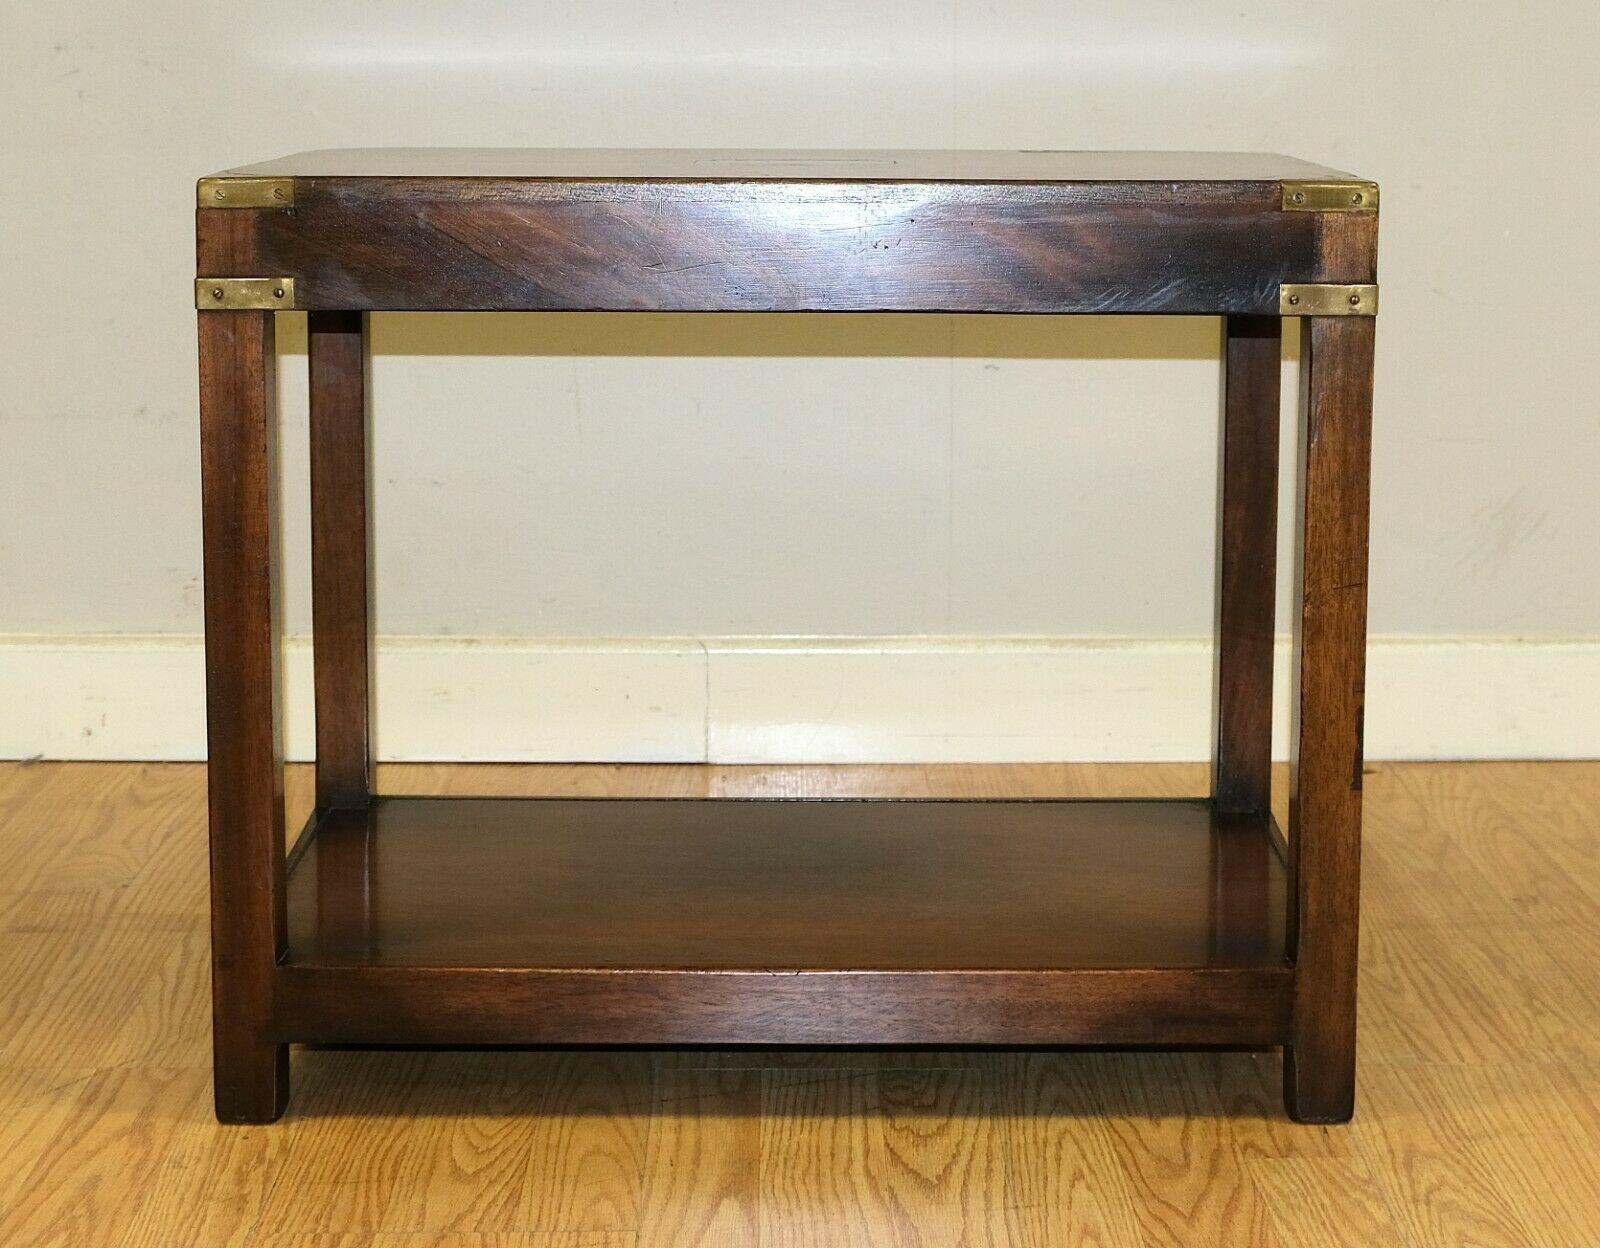 20th Century Lovely Kennedy Campaign Hardwood Side Table Brass Inset on Top & Single Shelf